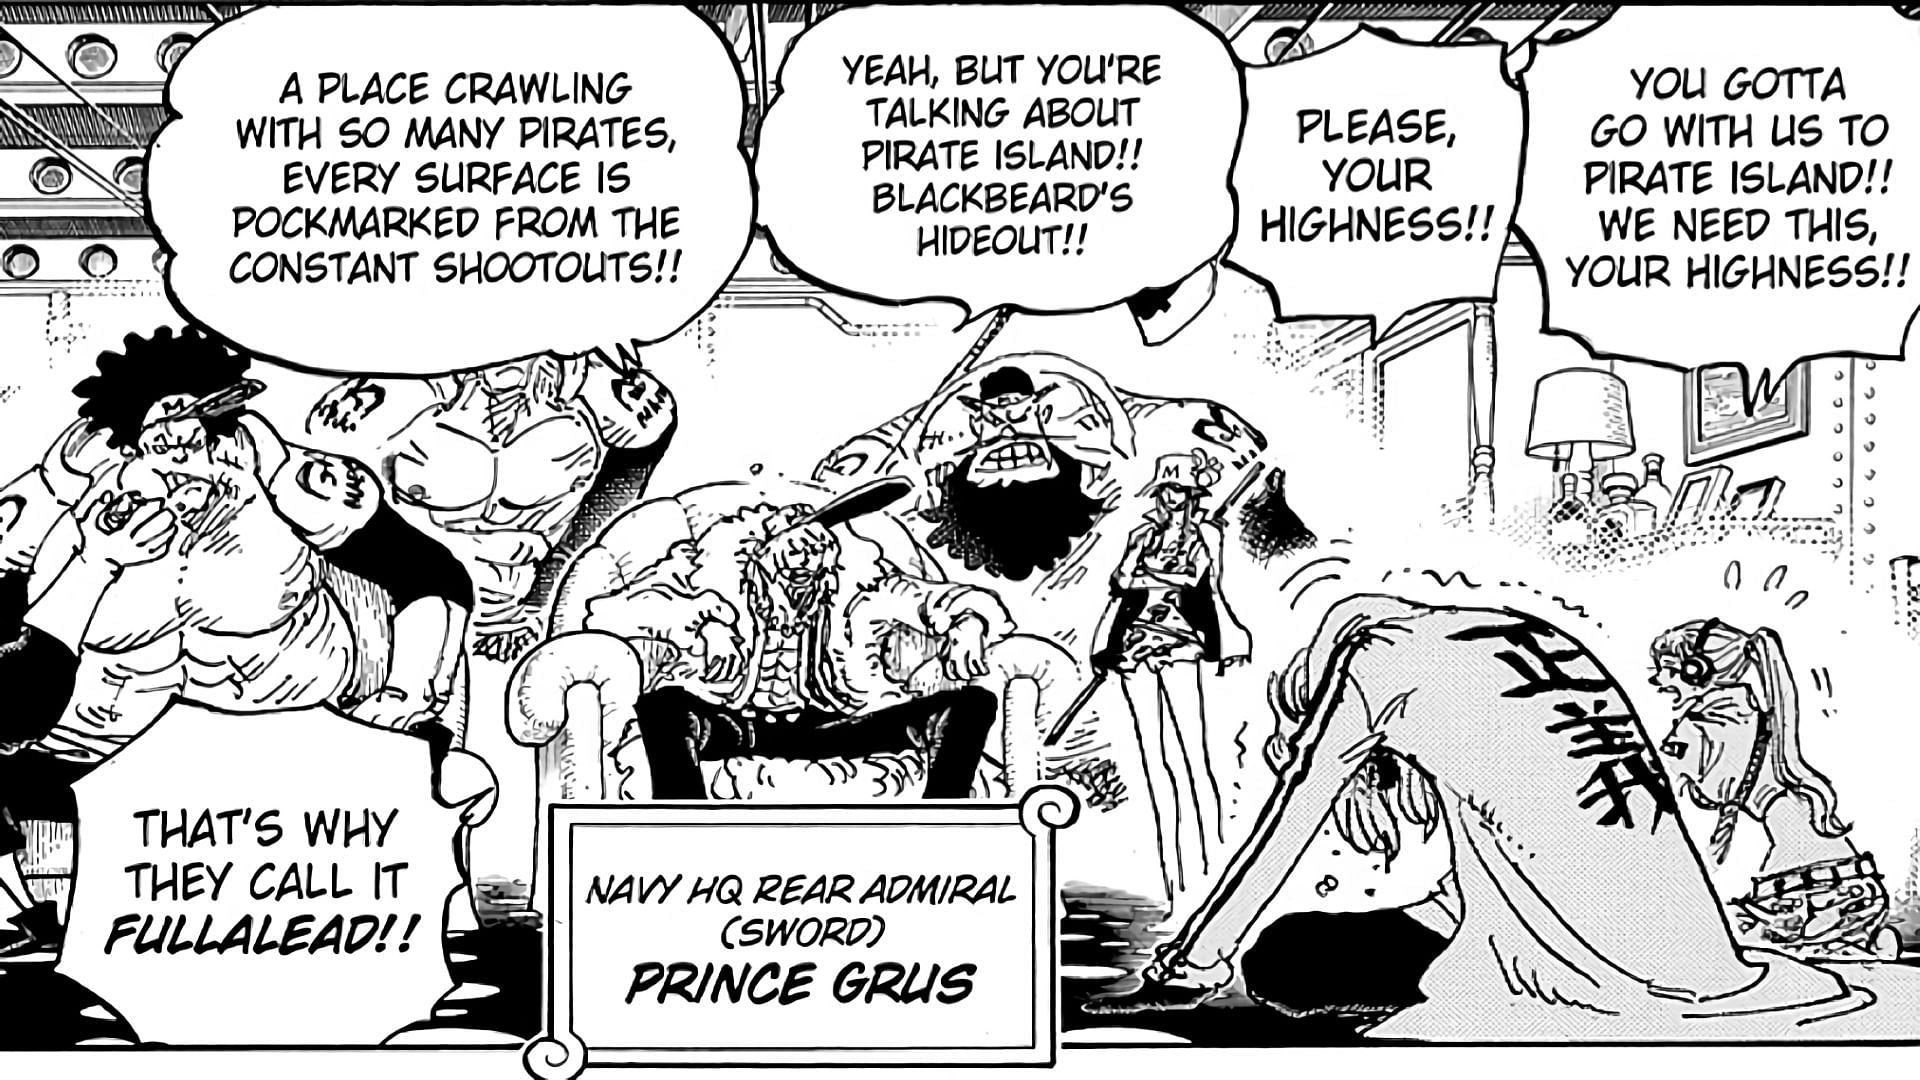 ONE PIECE SPOILERS on X: #ONEPIECE1062 FULL SUMMARY of chapter 1062 by me   / X